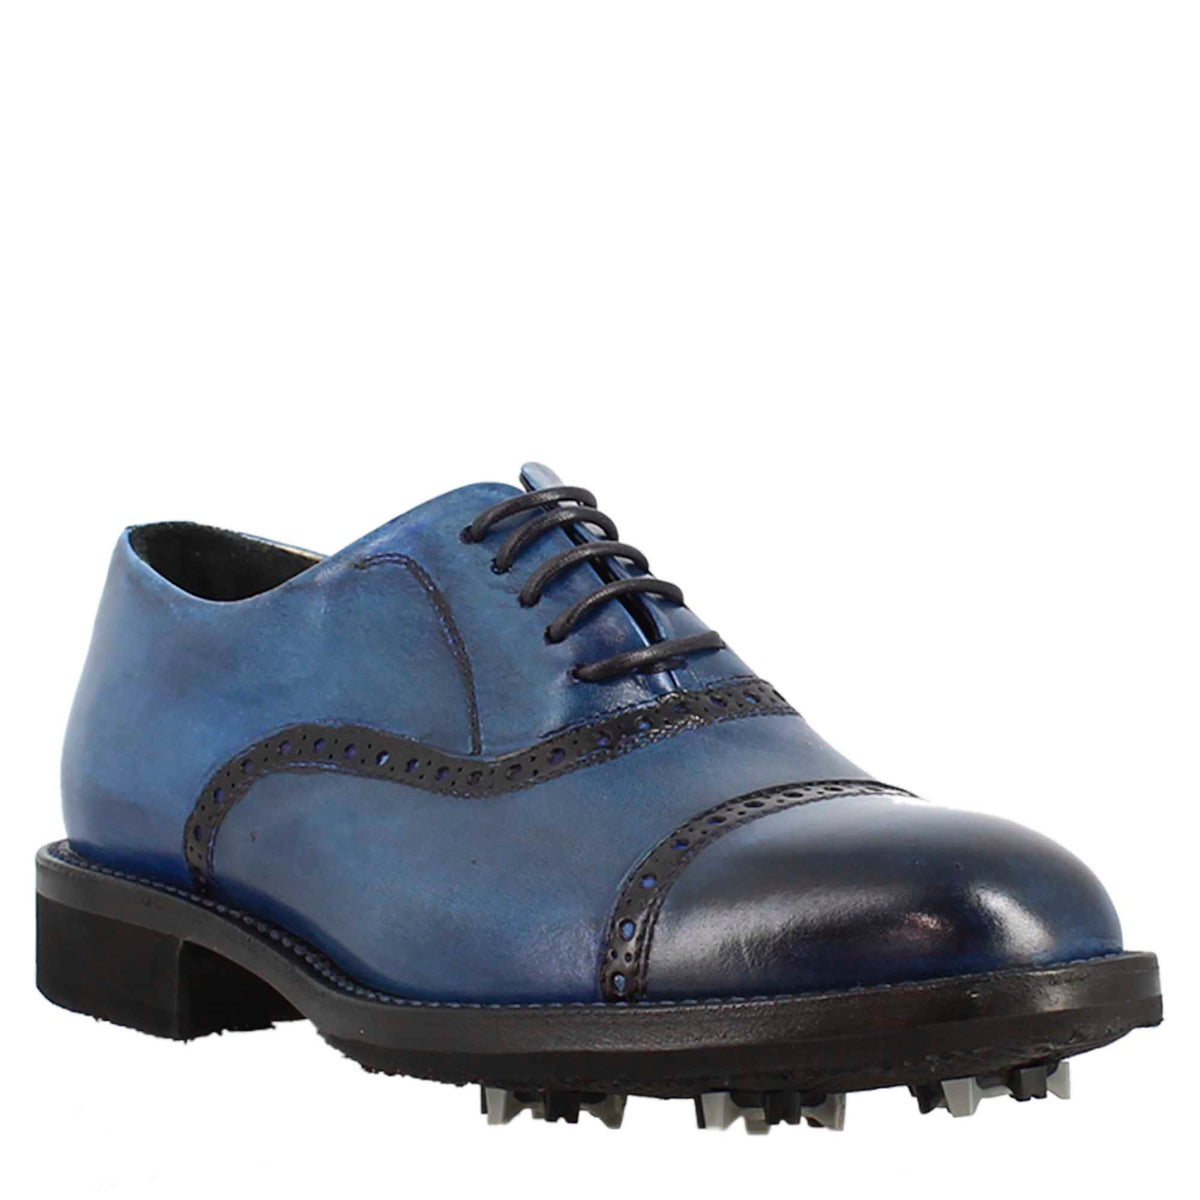 Women's golf shoes in blue leather handcrafted brogue details